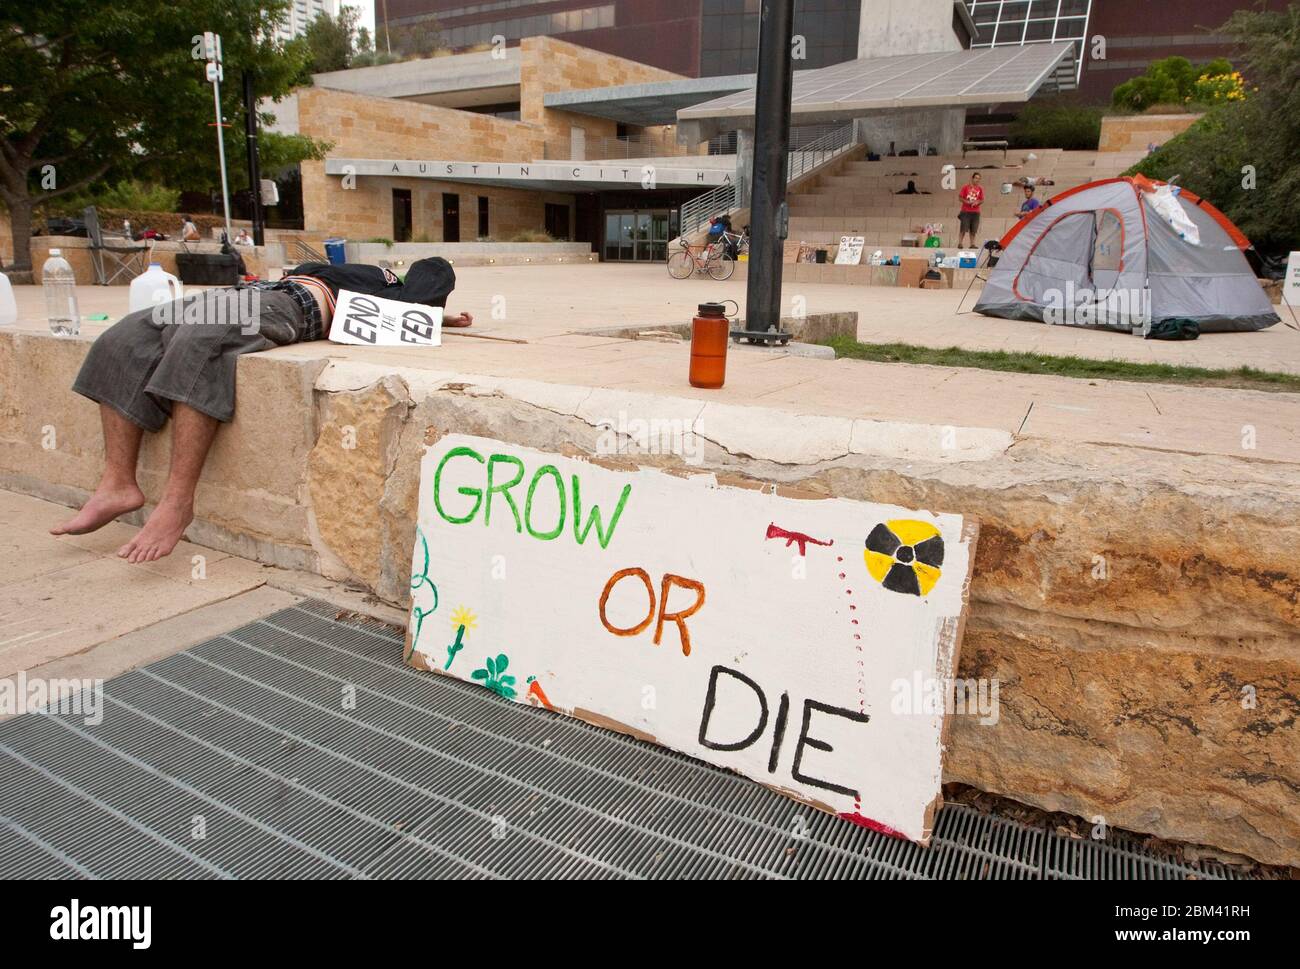 Austin, Texas USA, October 7, 2011: A tired protester takes a break  in the early morning hours of an Occupy Austin demonstration at City Hall in downtown. Occupy Austin is an offshoot of Occupy Wall Street, an ongoing protest that denounces the role that large companies play in the current financial crisis. Protesters have been camping out on the city hall plaza for several days. ©Marjorie Kamys Cotera/Daemmrich Photography Stock Photo